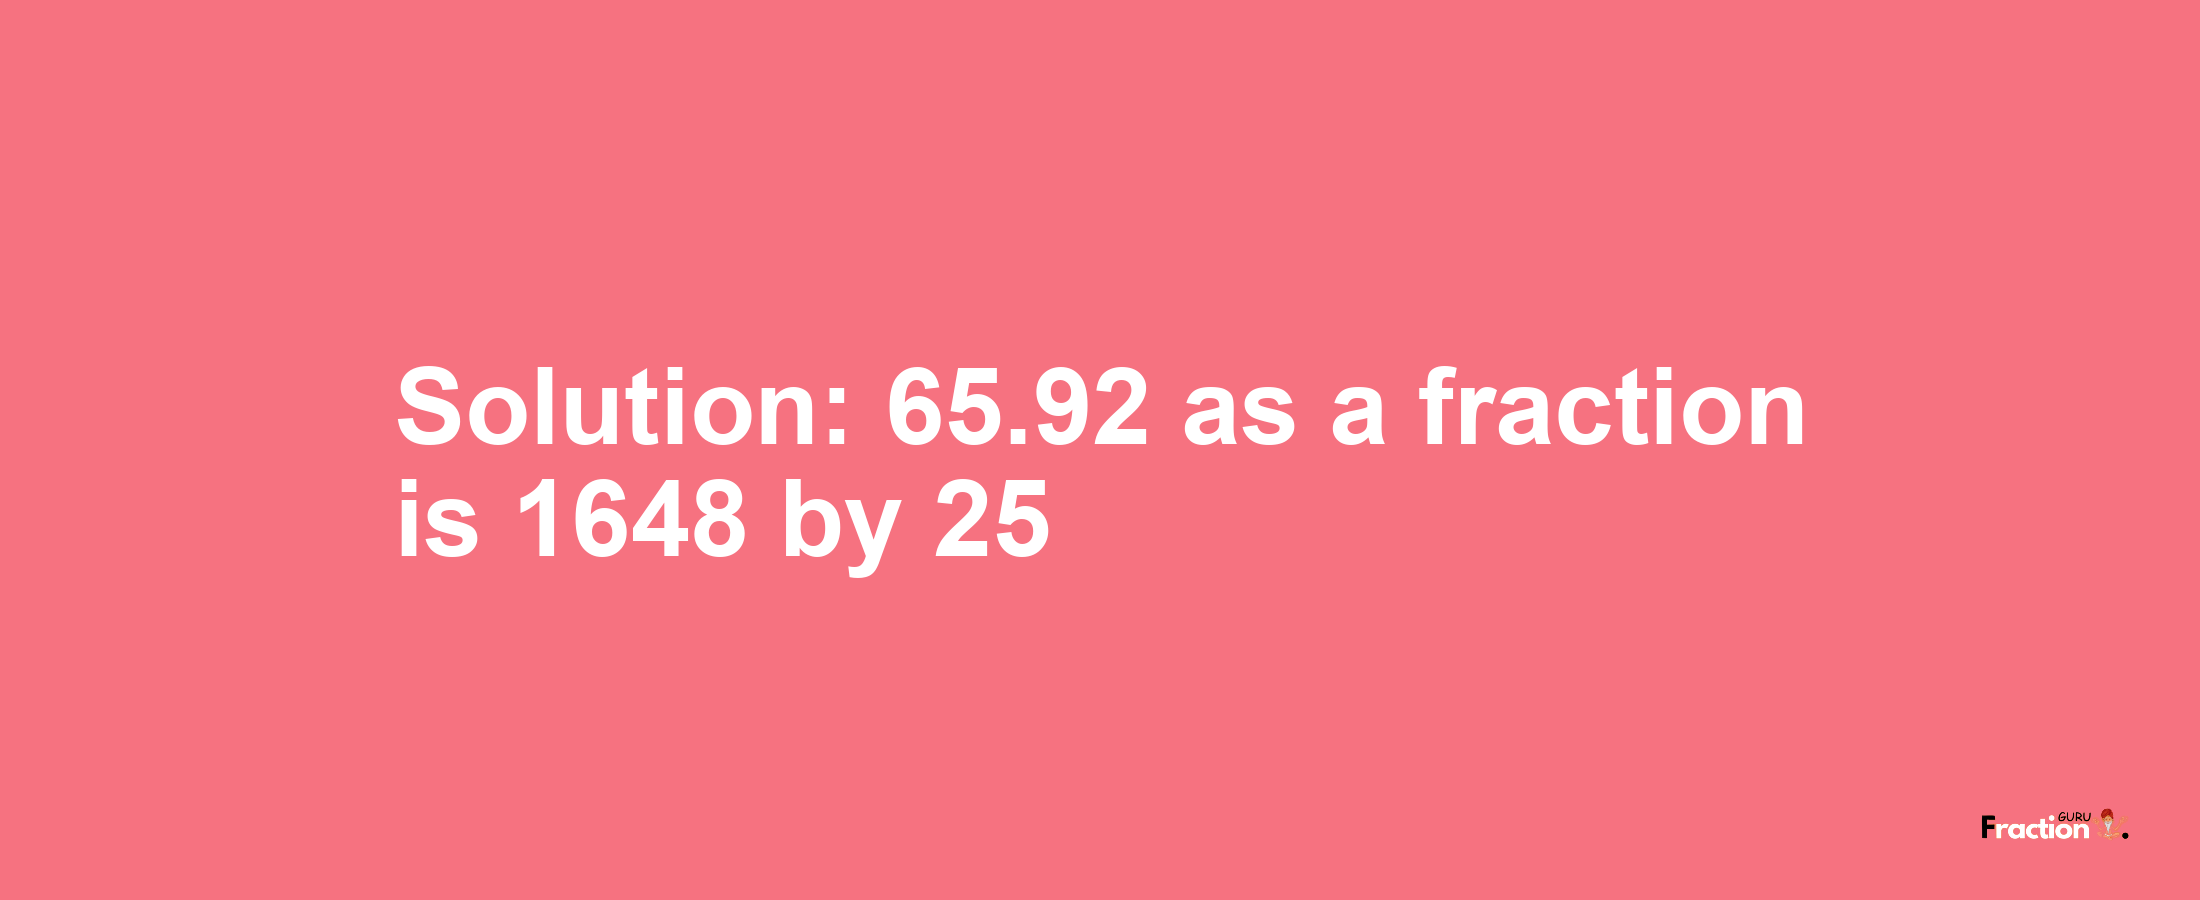 Solution:65.92 as a fraction is 1648/25